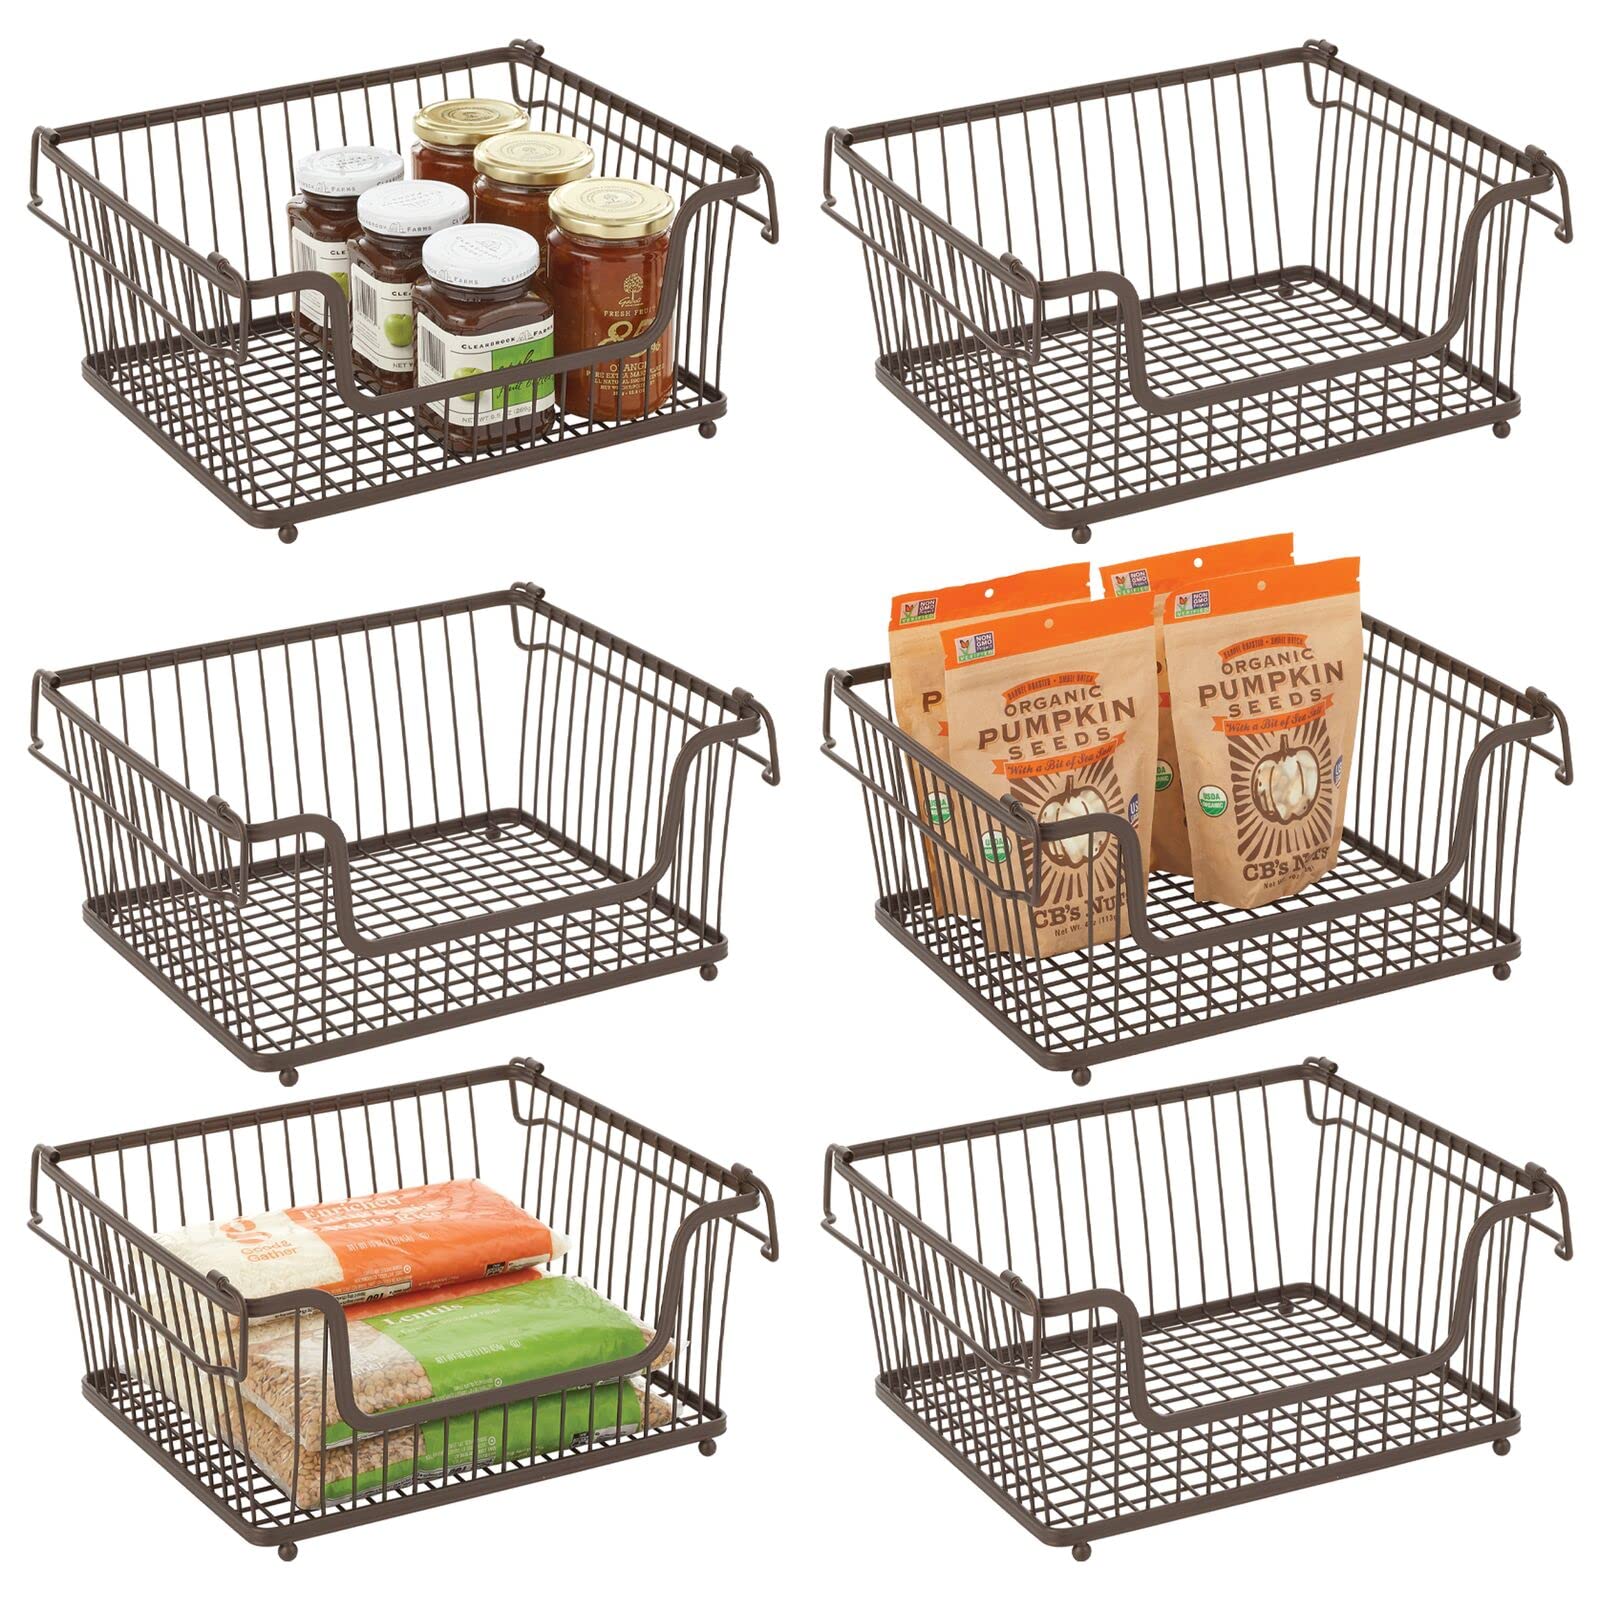 Stackable metal storage containers.